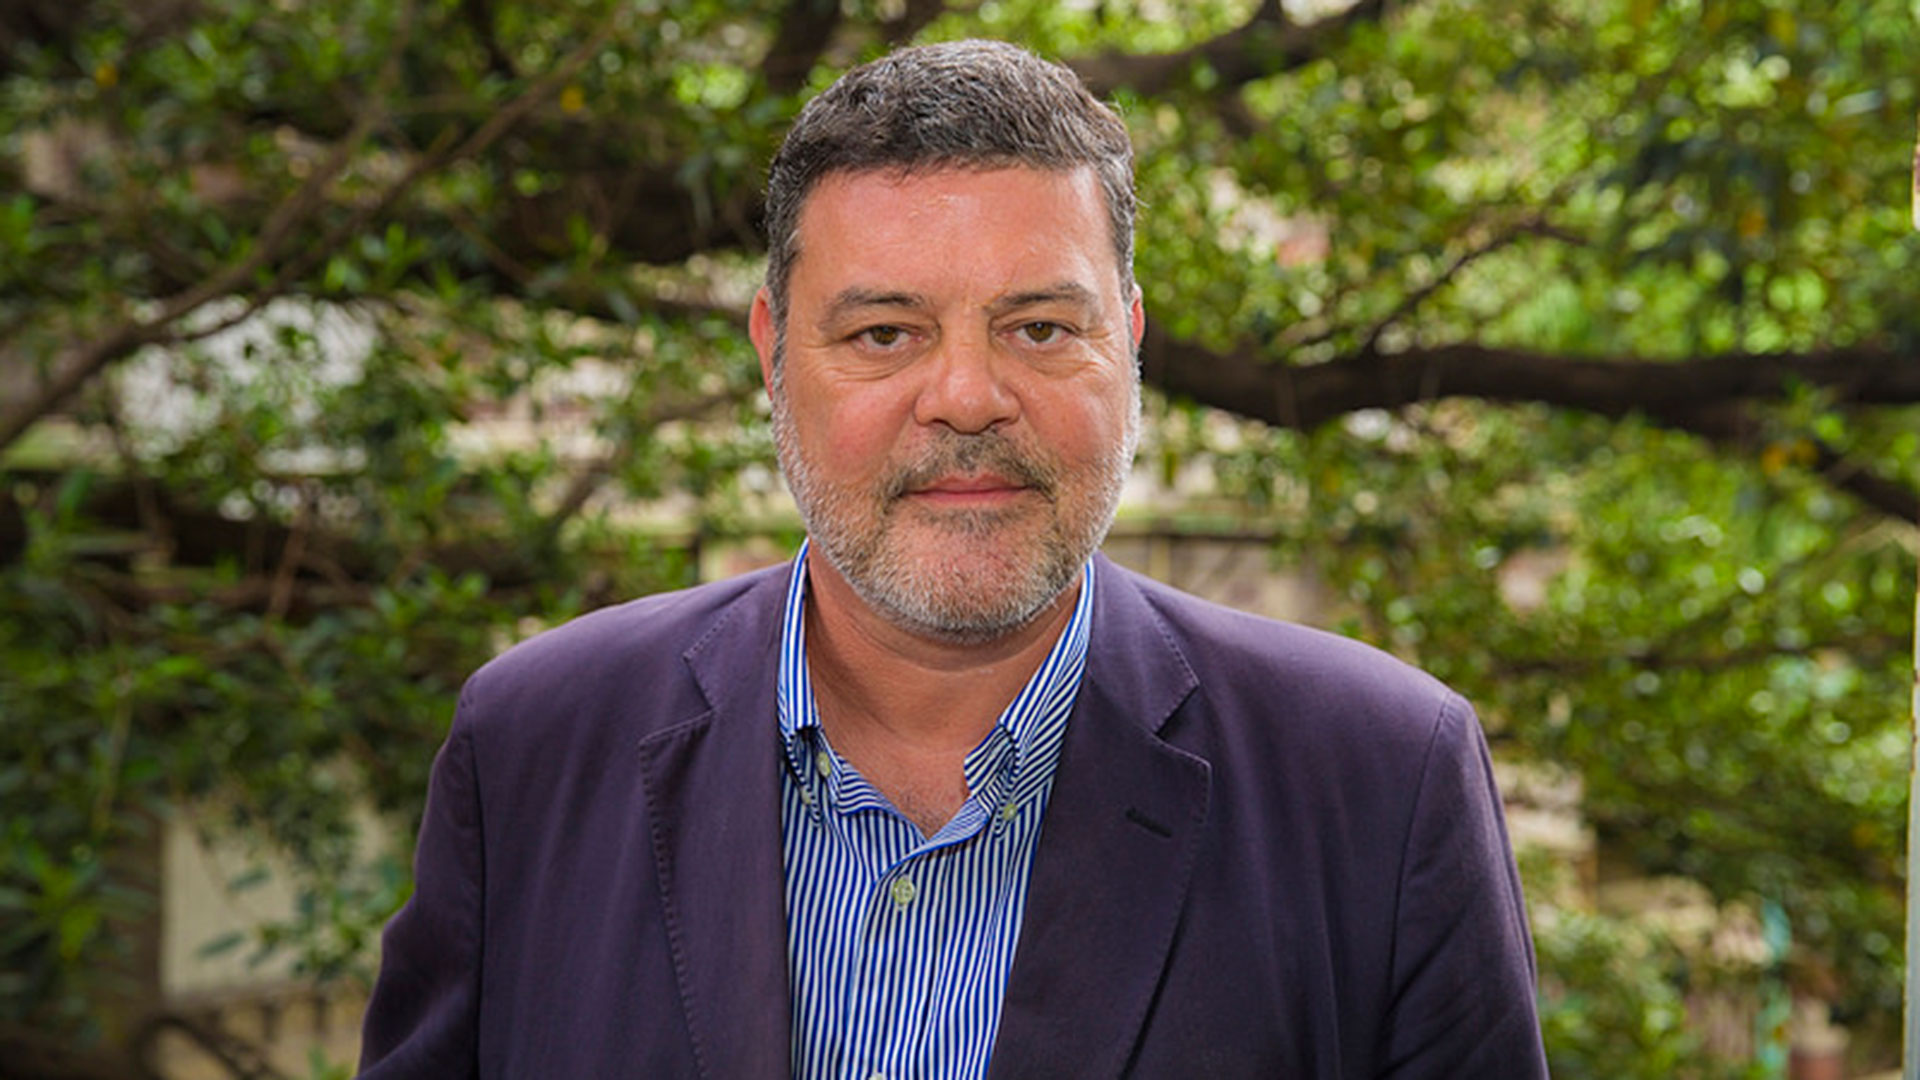 Martín Marcos won by competition the designation of director of the Museum of Decorative Arts in 2017